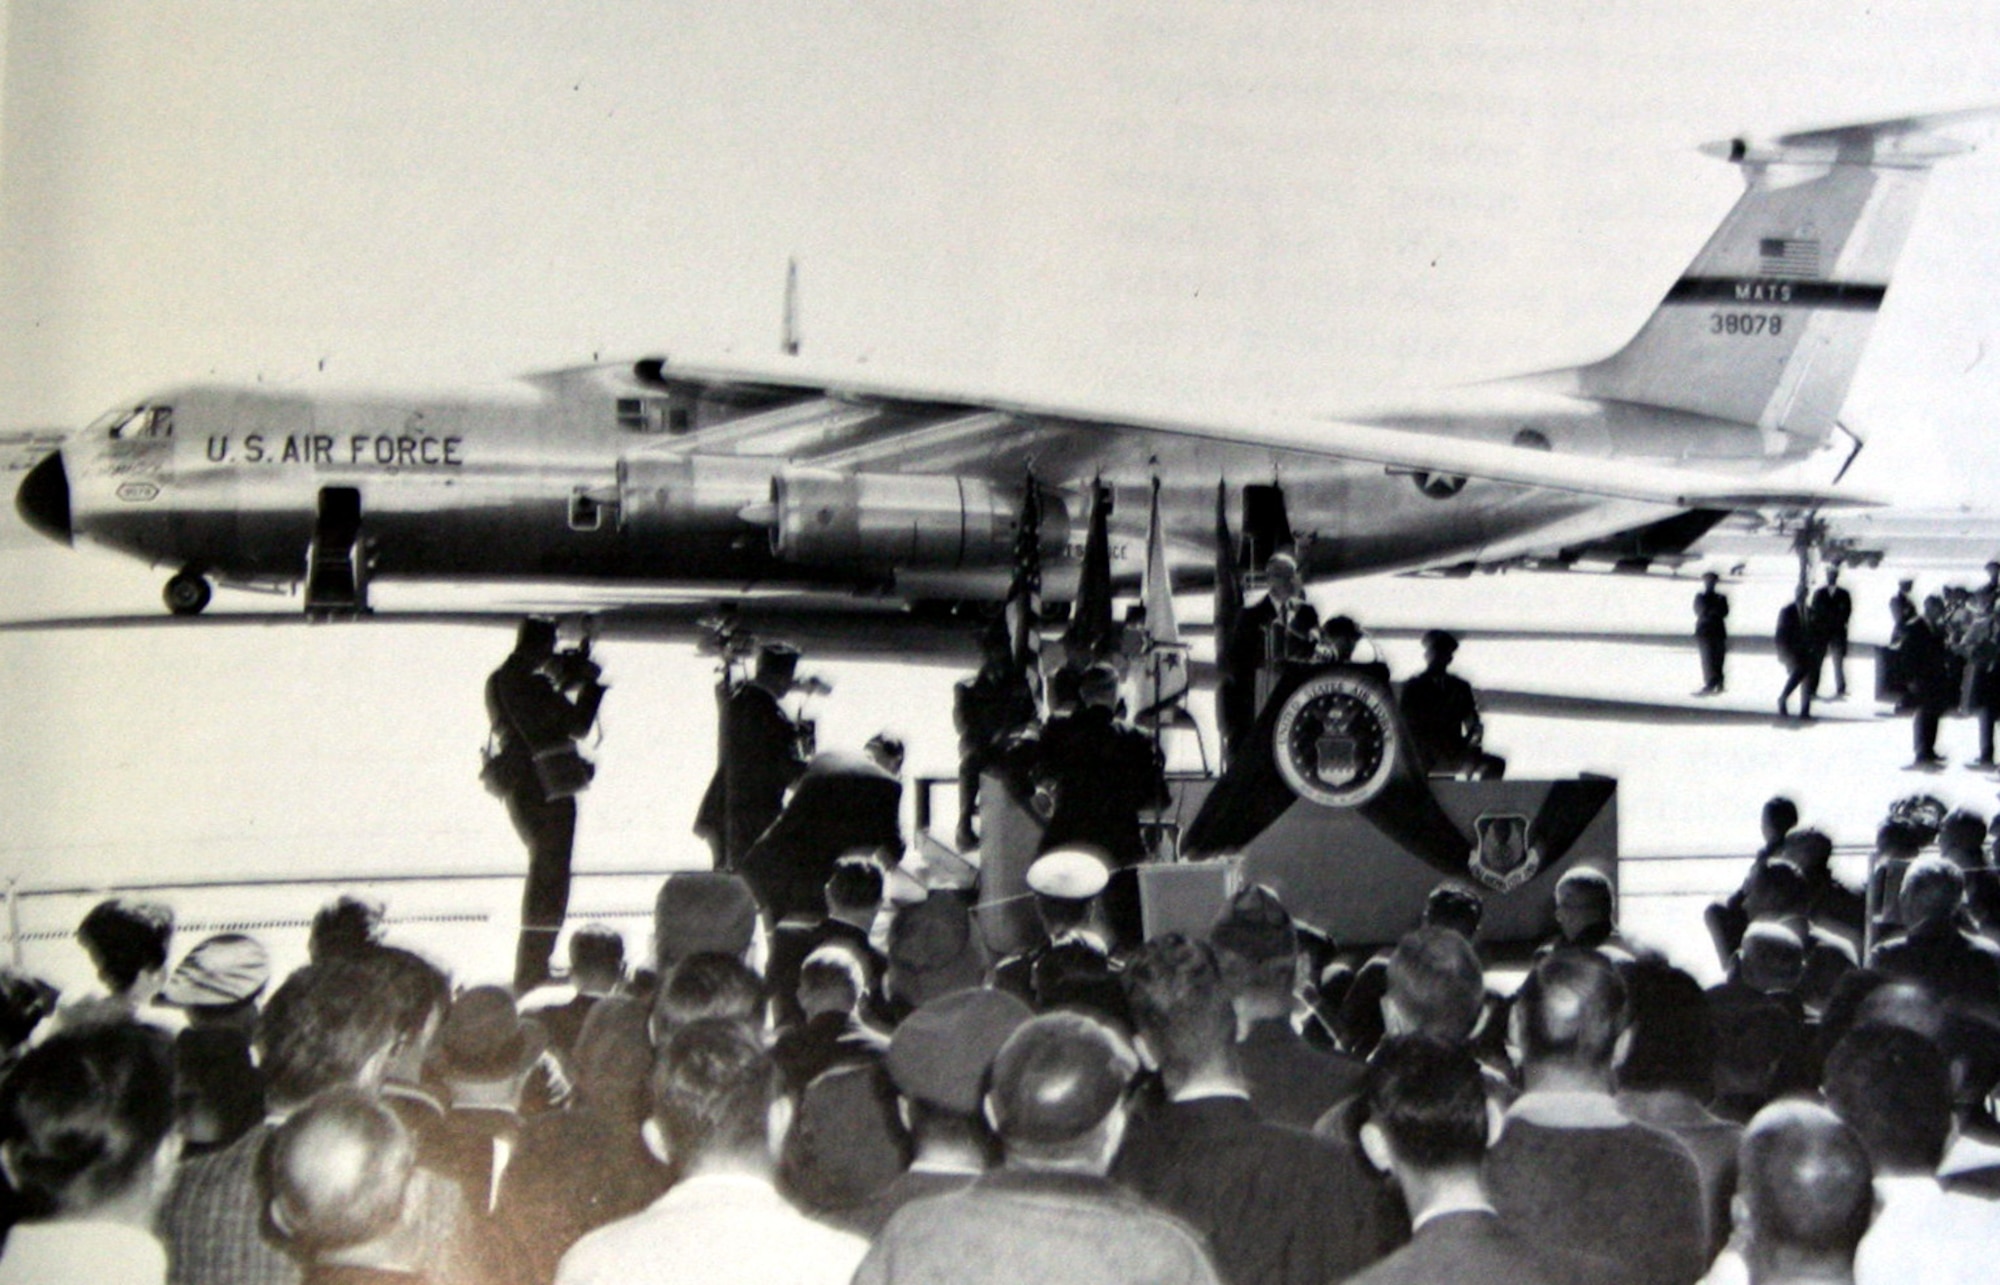 The first C-141 Starlifter to enter the Military Air Transport Service fleet is unveiled in a ceremony at Tinker Air Force Base, Okla., on Oct. 19, 1964. Able to move the Army's troops anywhere in the world, the new jet gave the United States an instant response capability when it began operational missions in 1965. (U.S. Air Force History Photo)